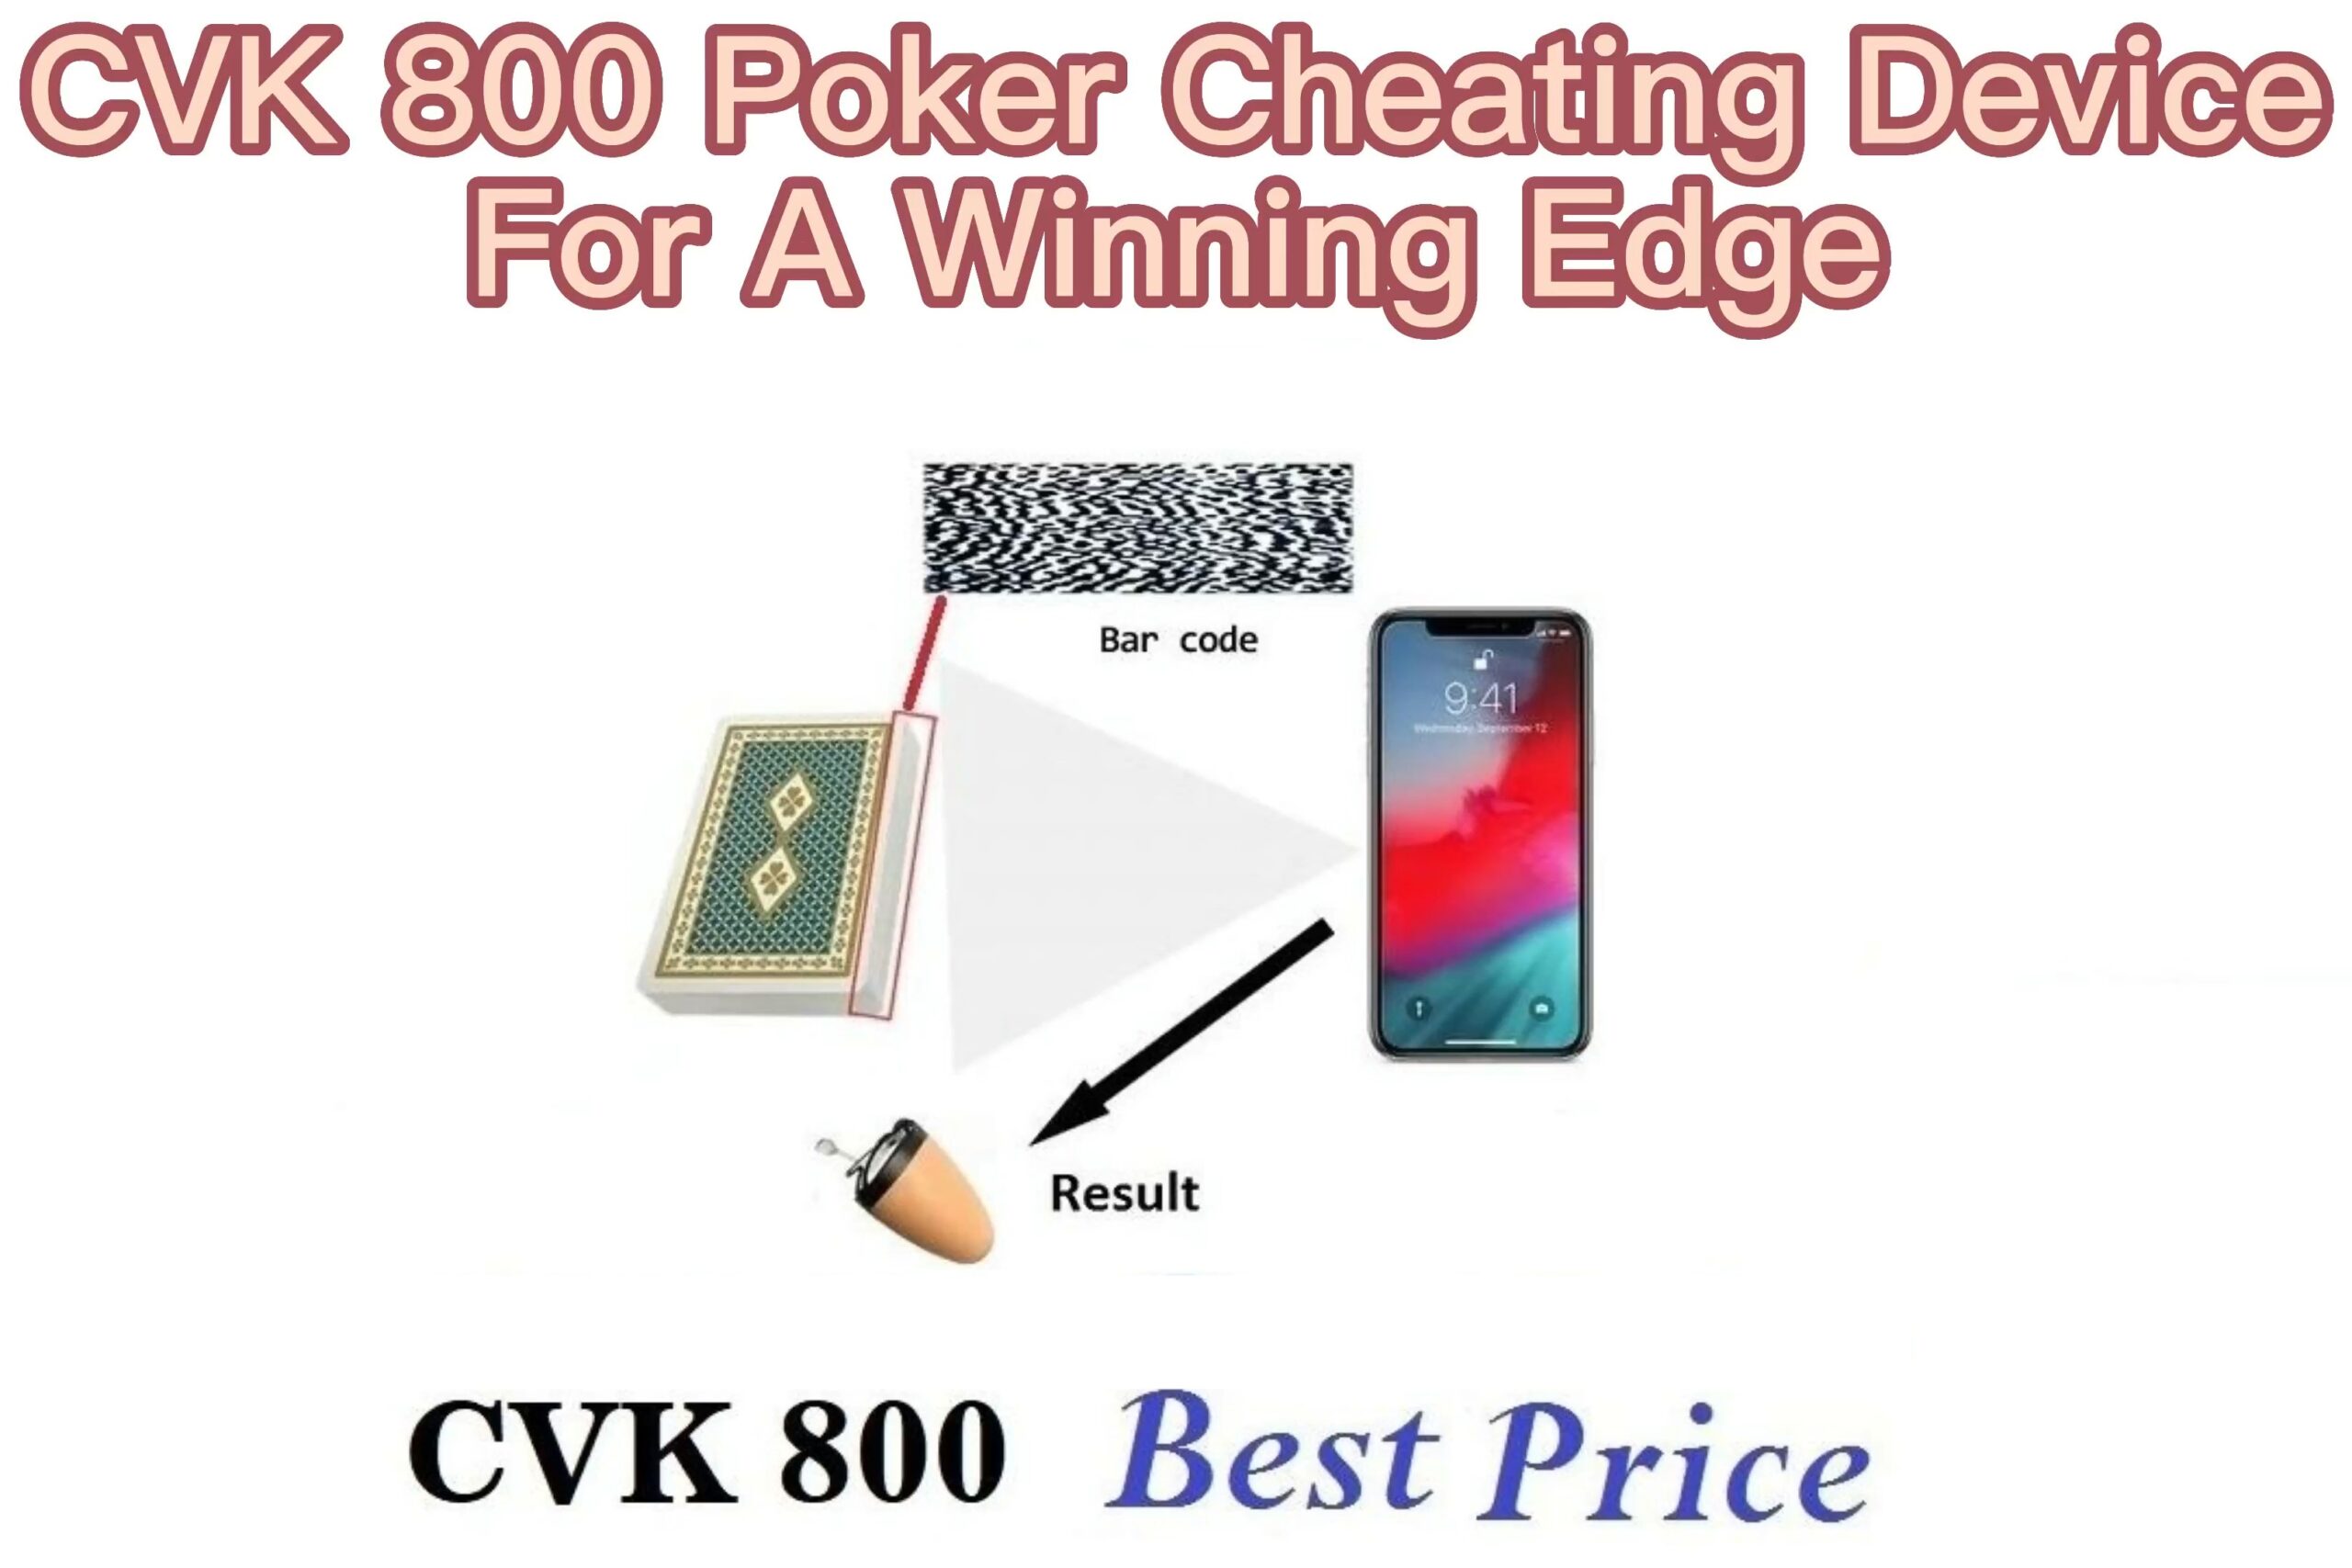 CVK 800 Poker Cheating Device For A Winning Edge